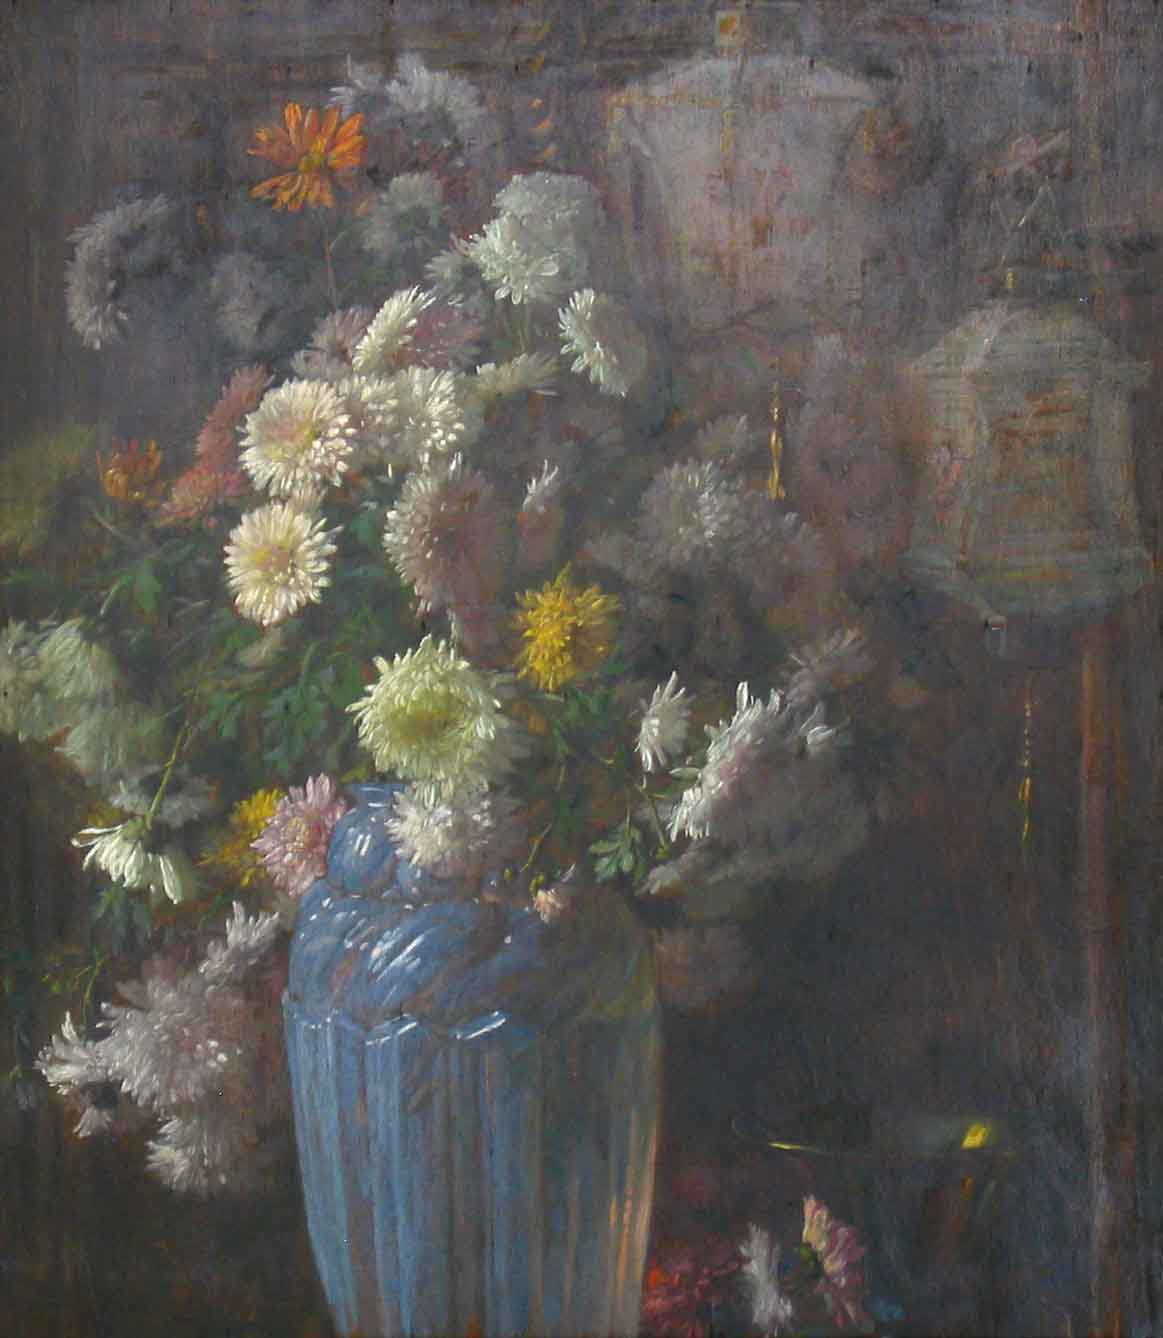 Flowers in a Blue Glass Vase